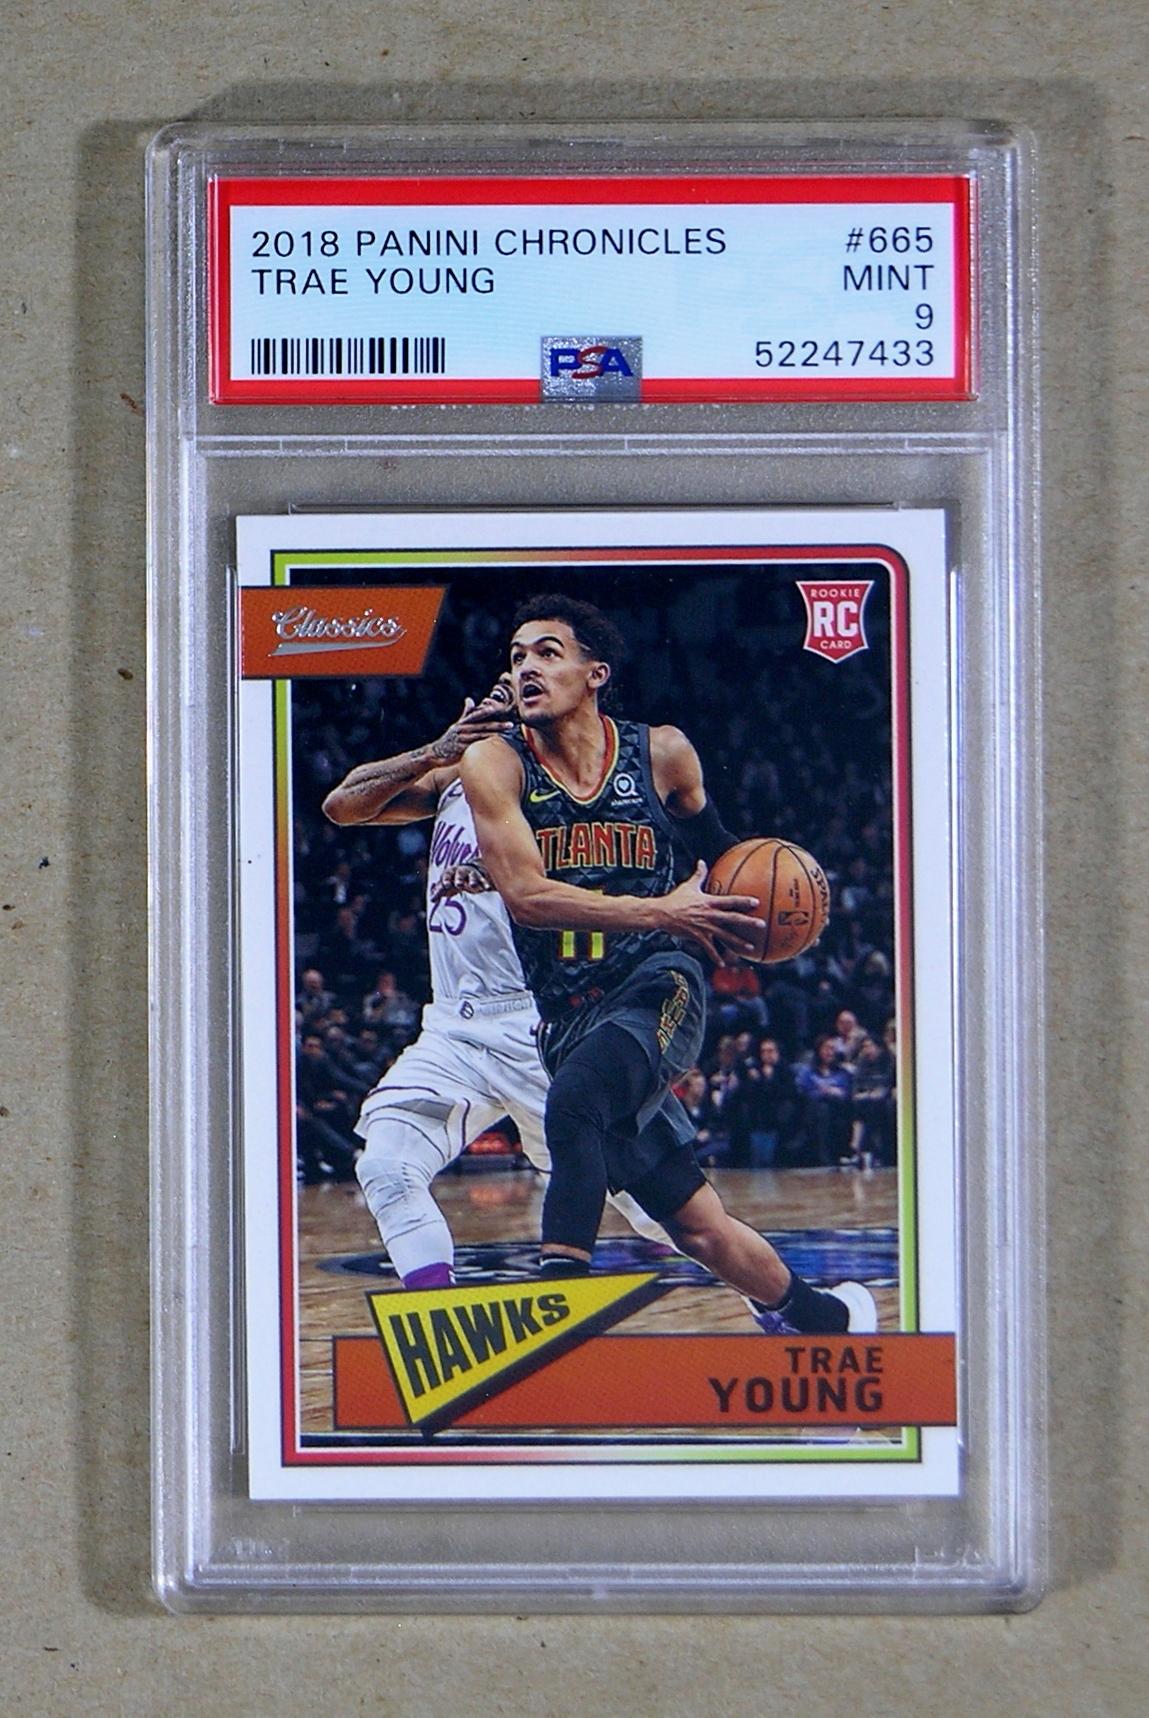 2018 Panini Chronicles ROOKIE Basketball Card #665 Rookie Trae Young Atlant